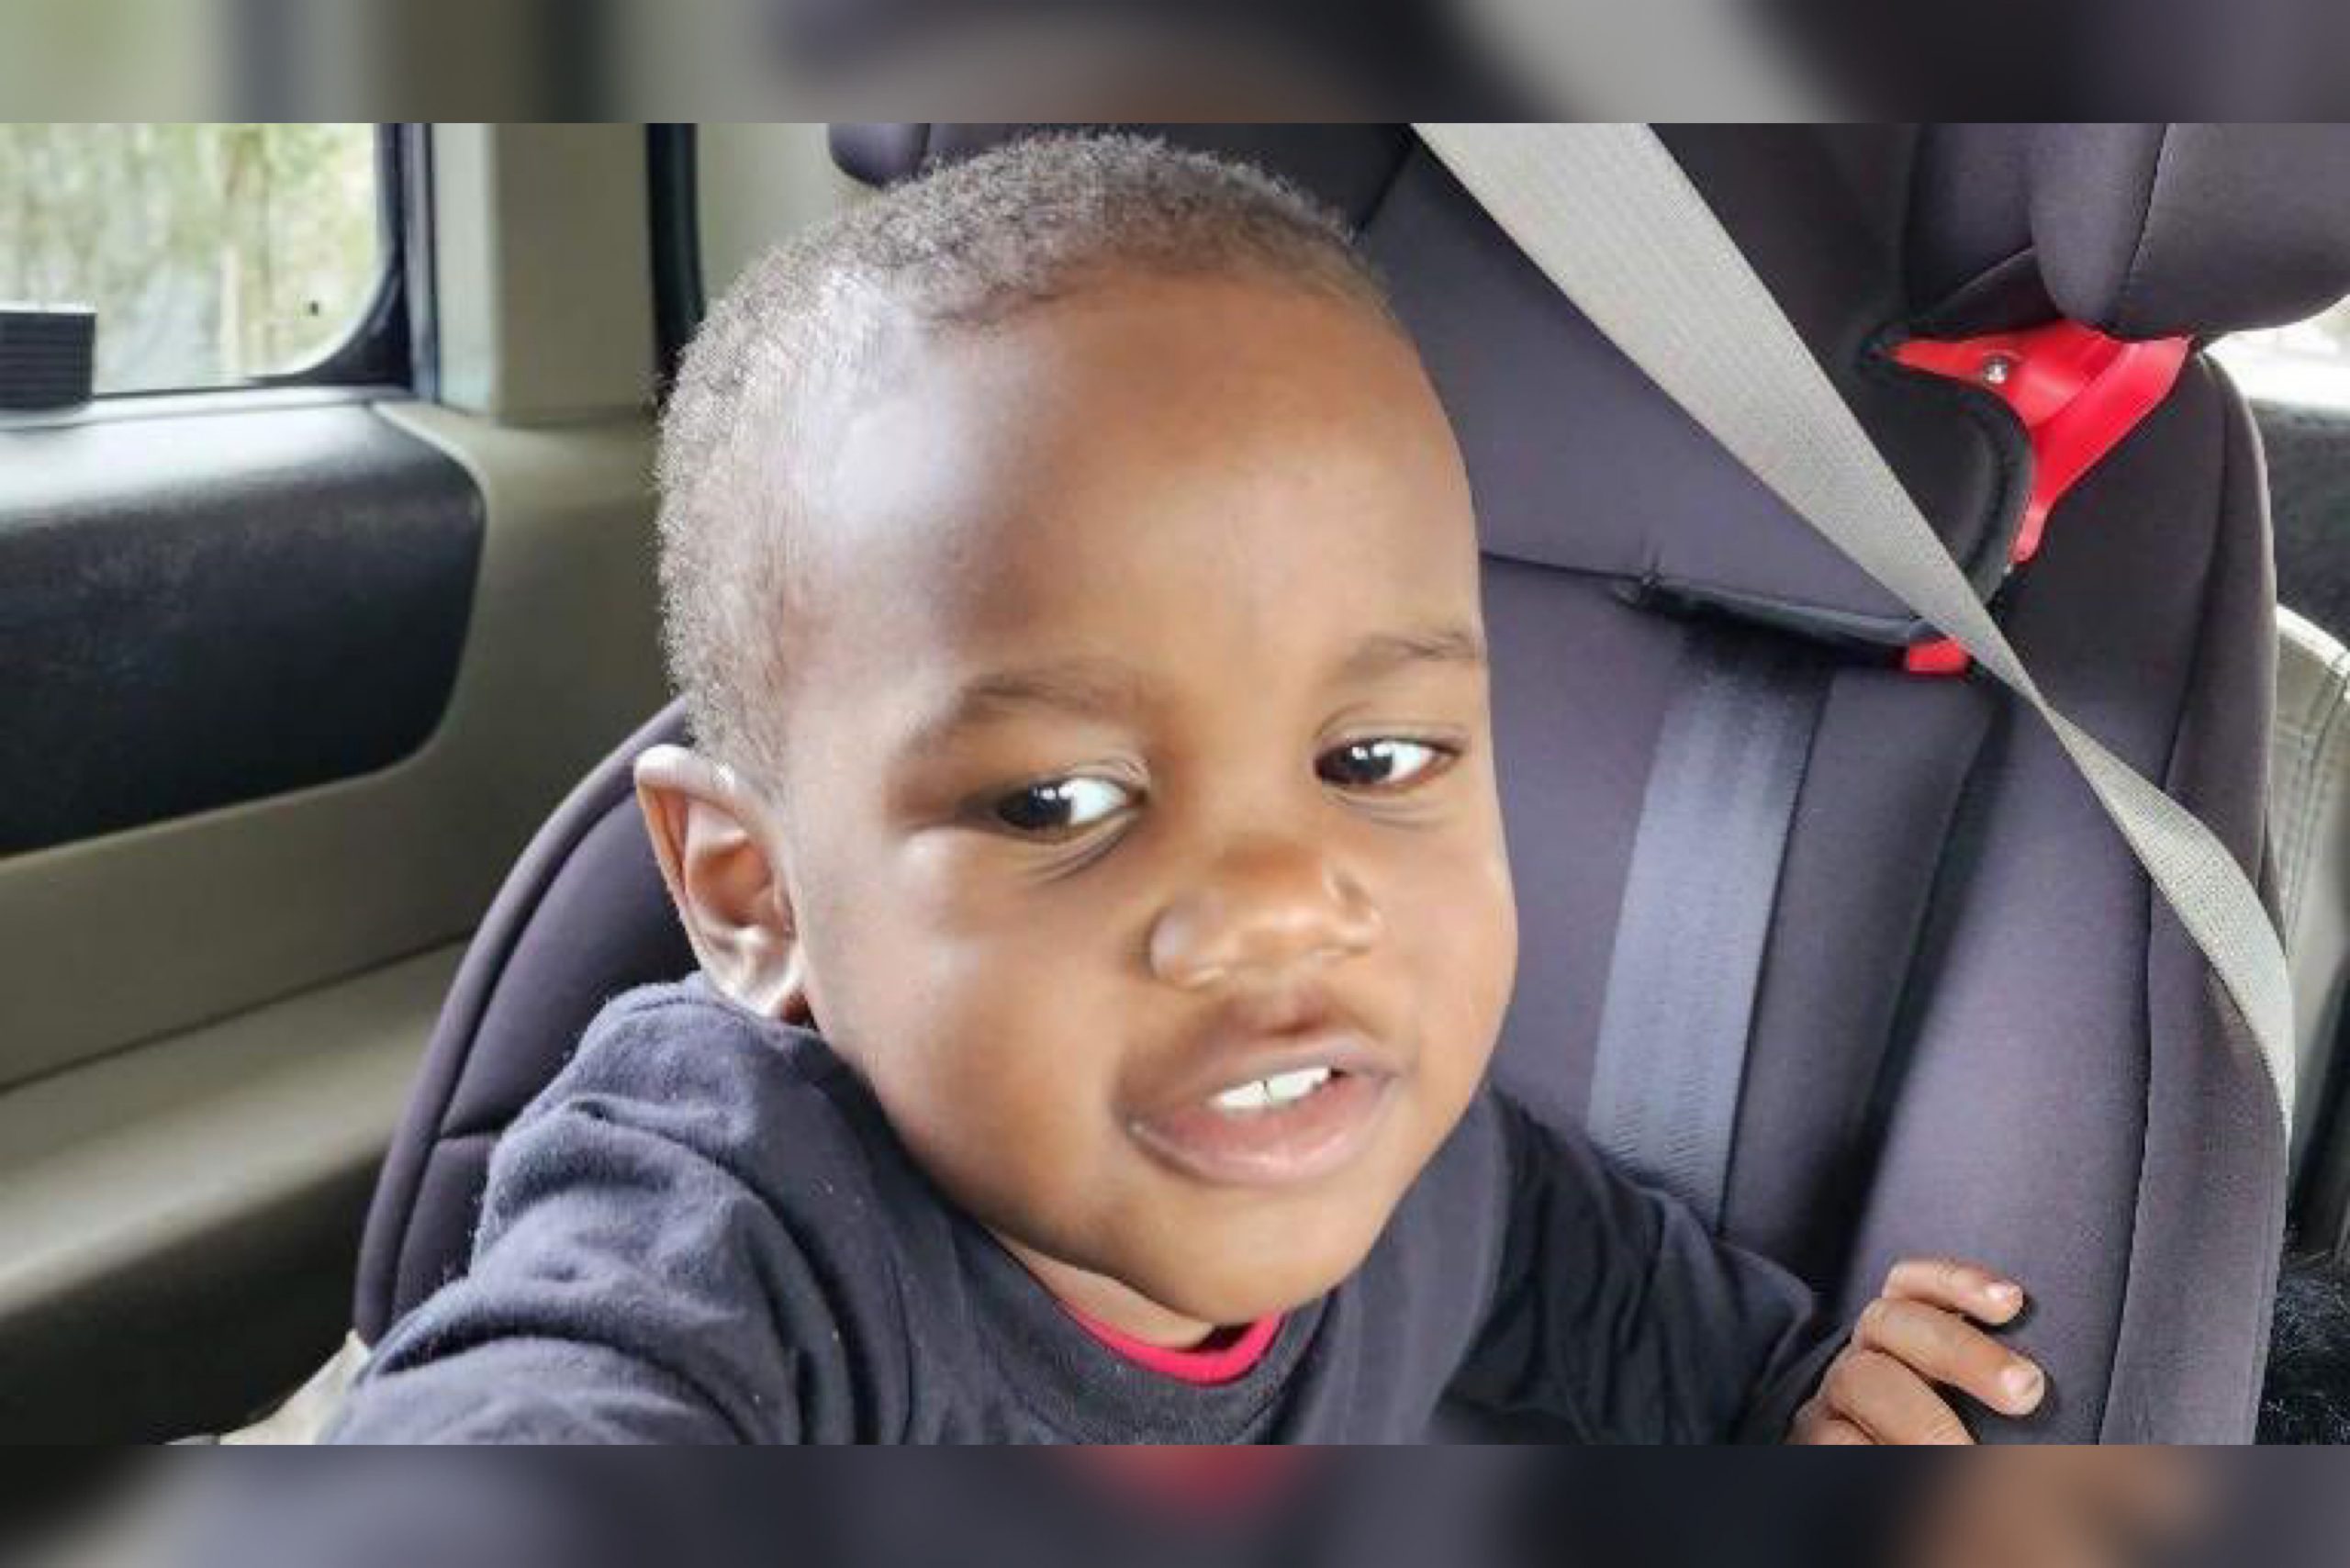 Body of Missing 2-Year-Old Found In Alligator’s Mouth, Father Charged